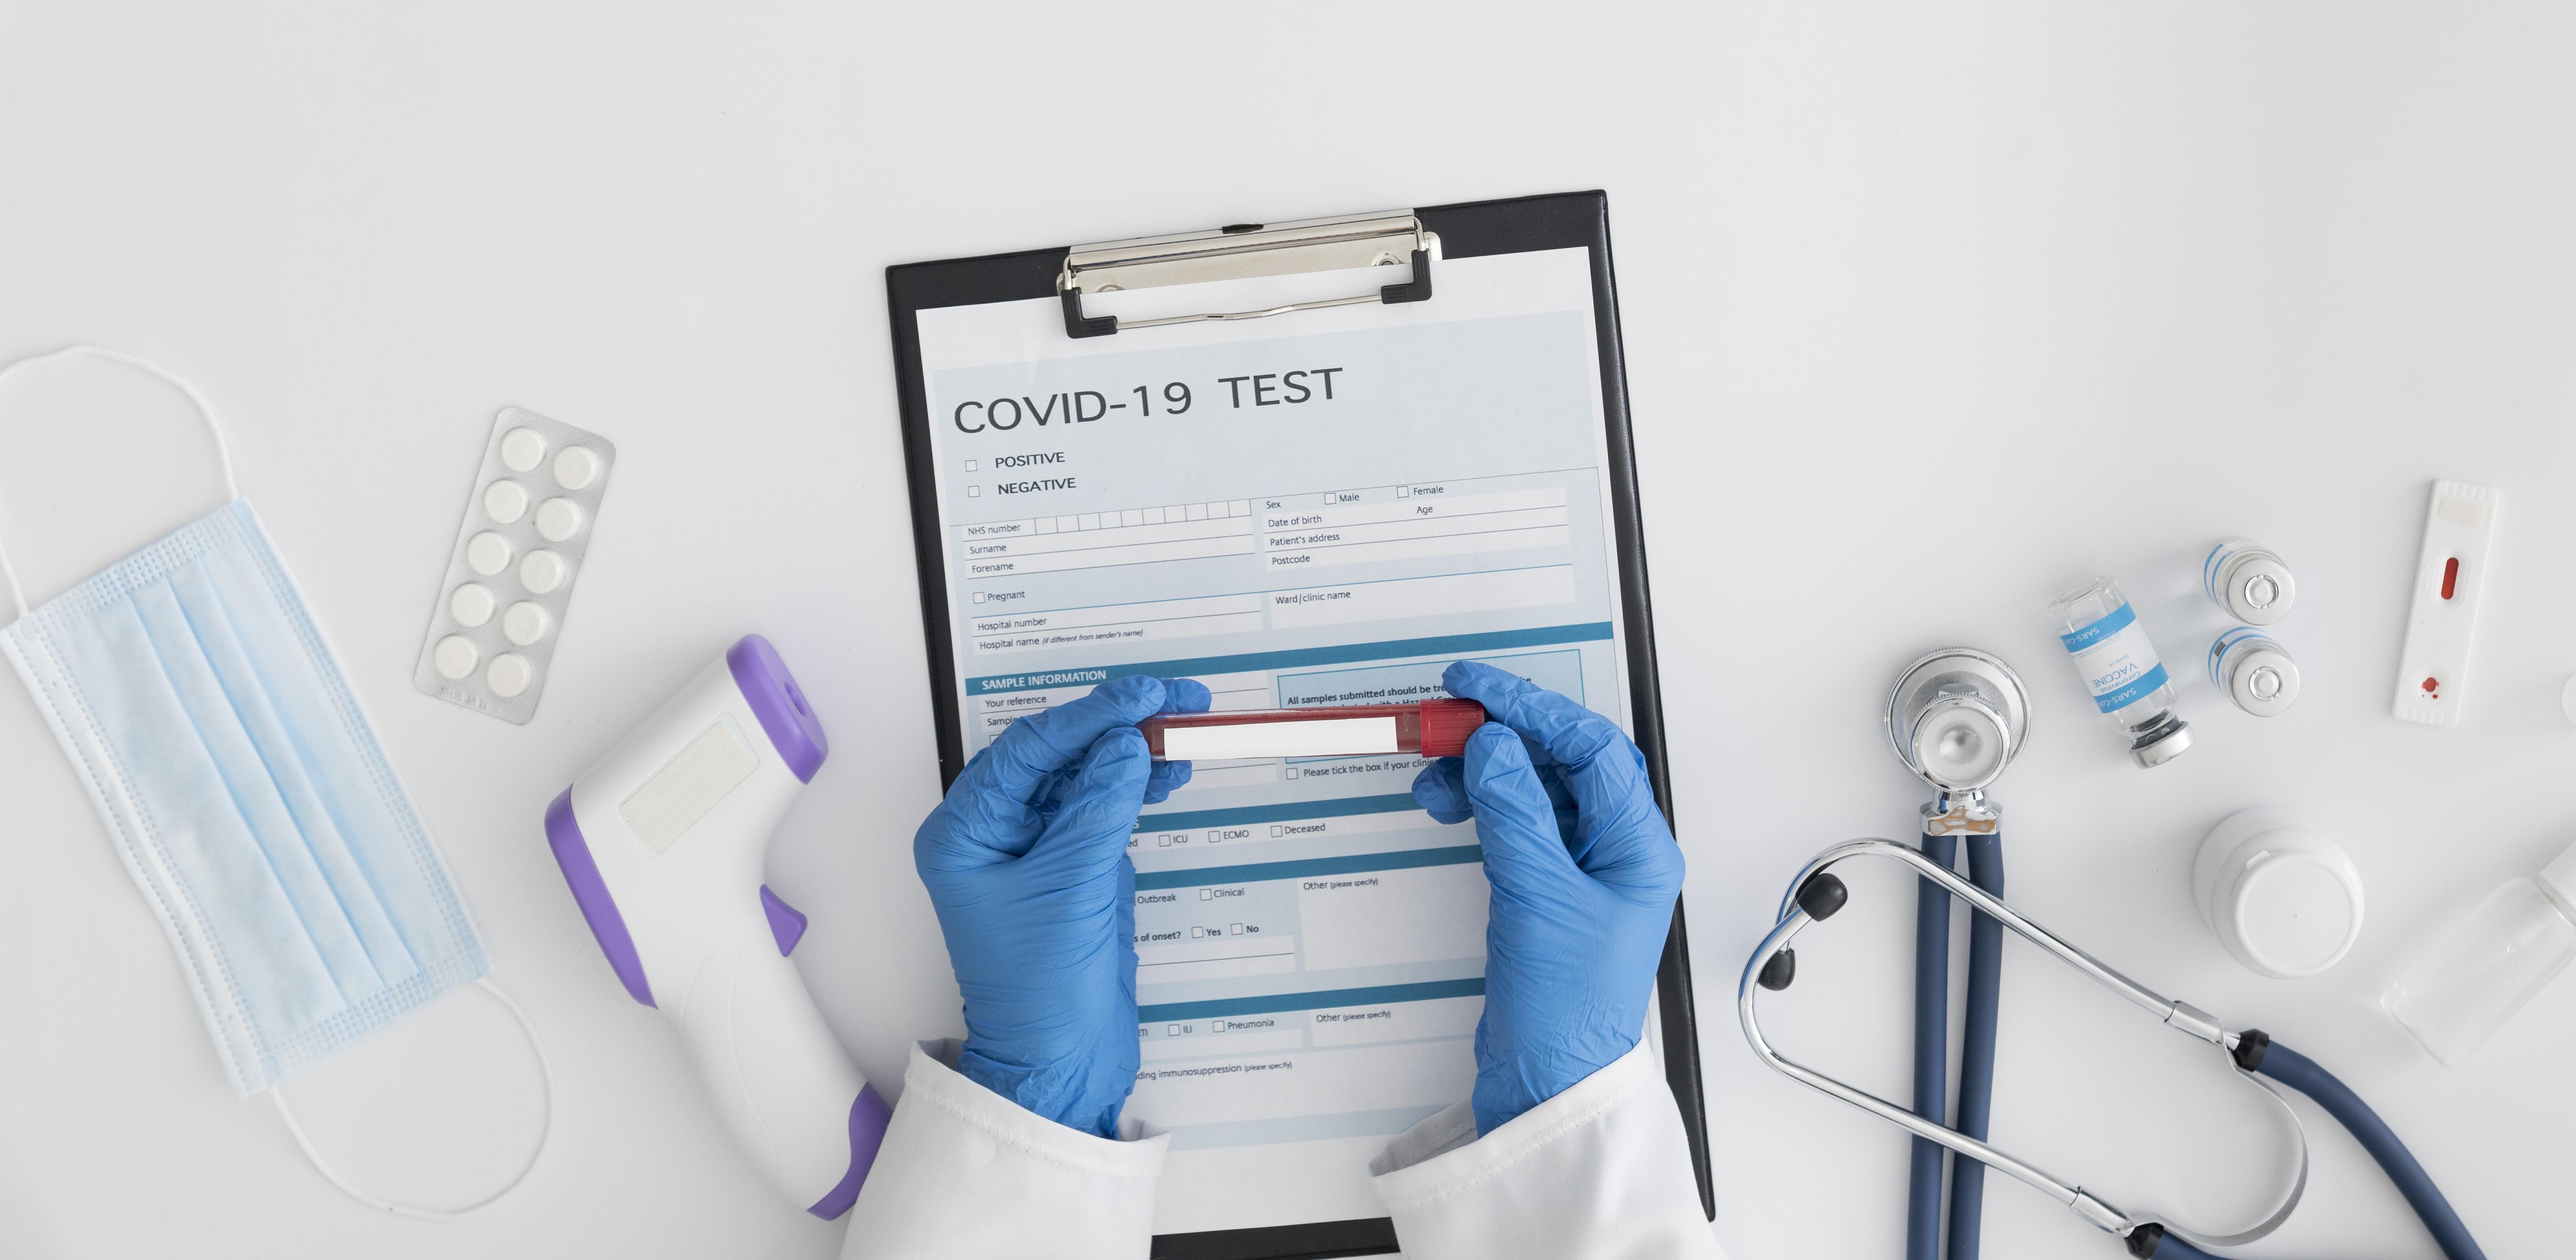 Where to Get a Covid-19 PCR Test in Nagoya with Negative Certificate